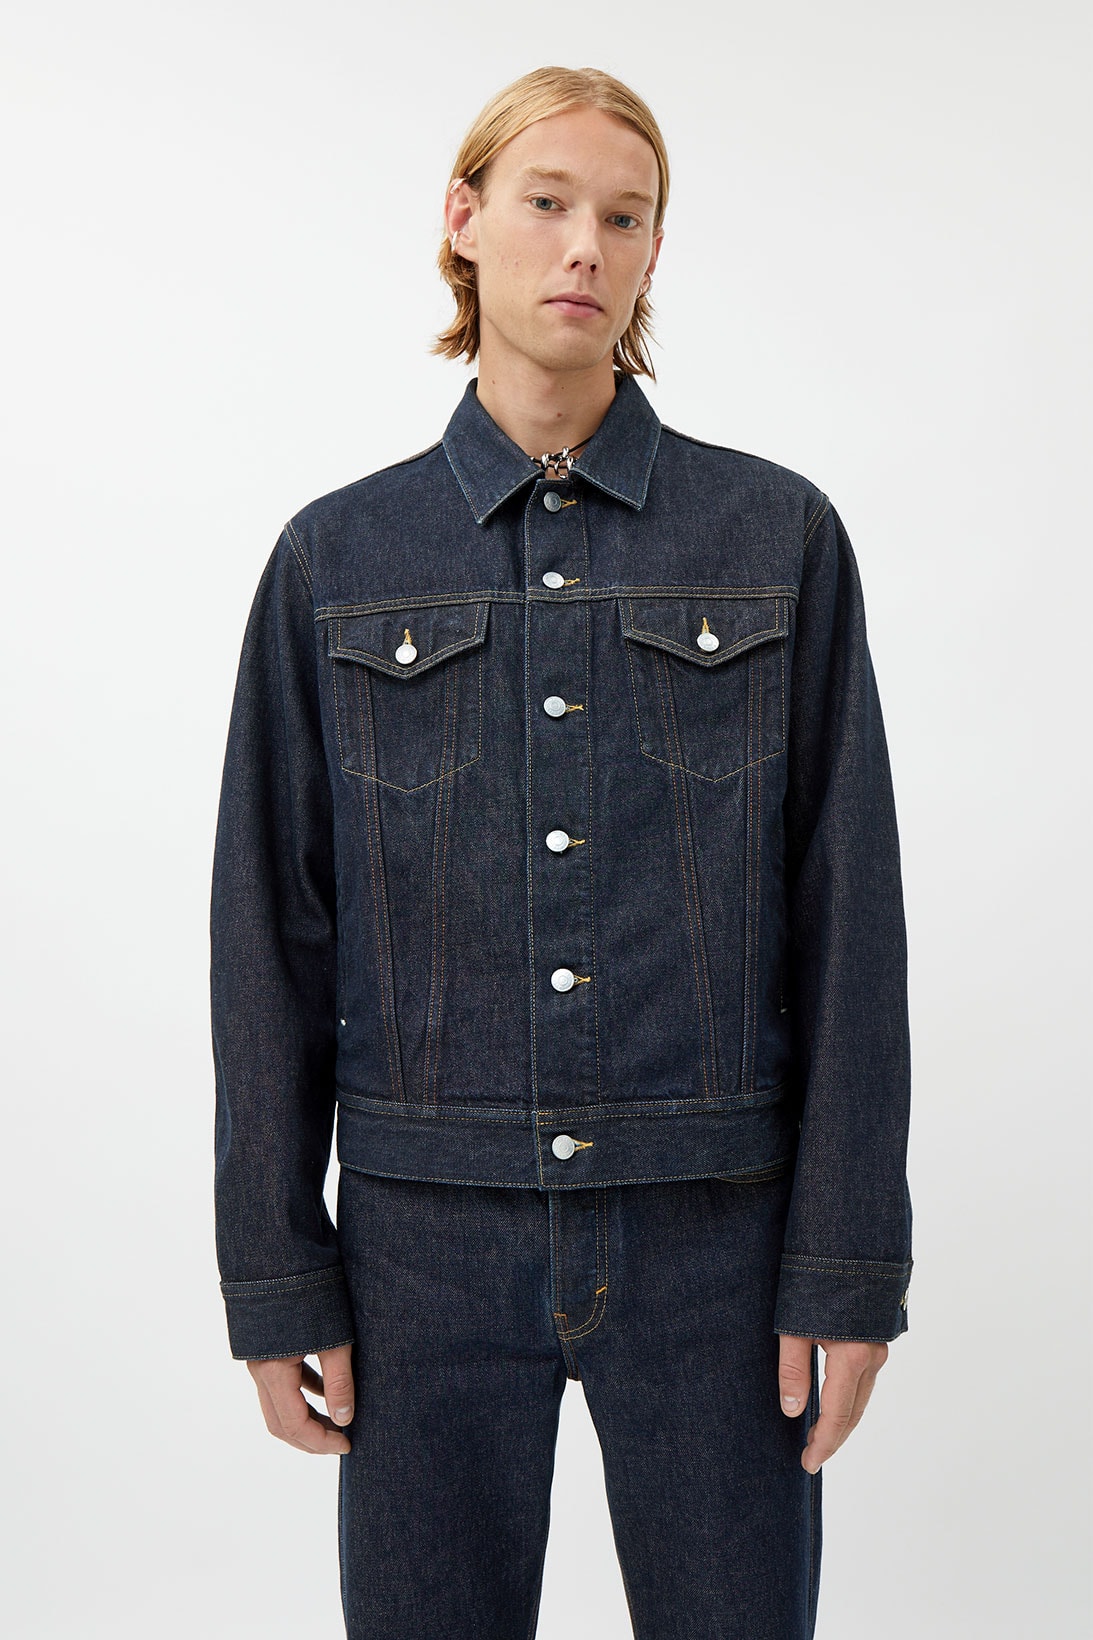 weekday denim jeans jackets sustainable recyclable eco-friendly capsule collection 